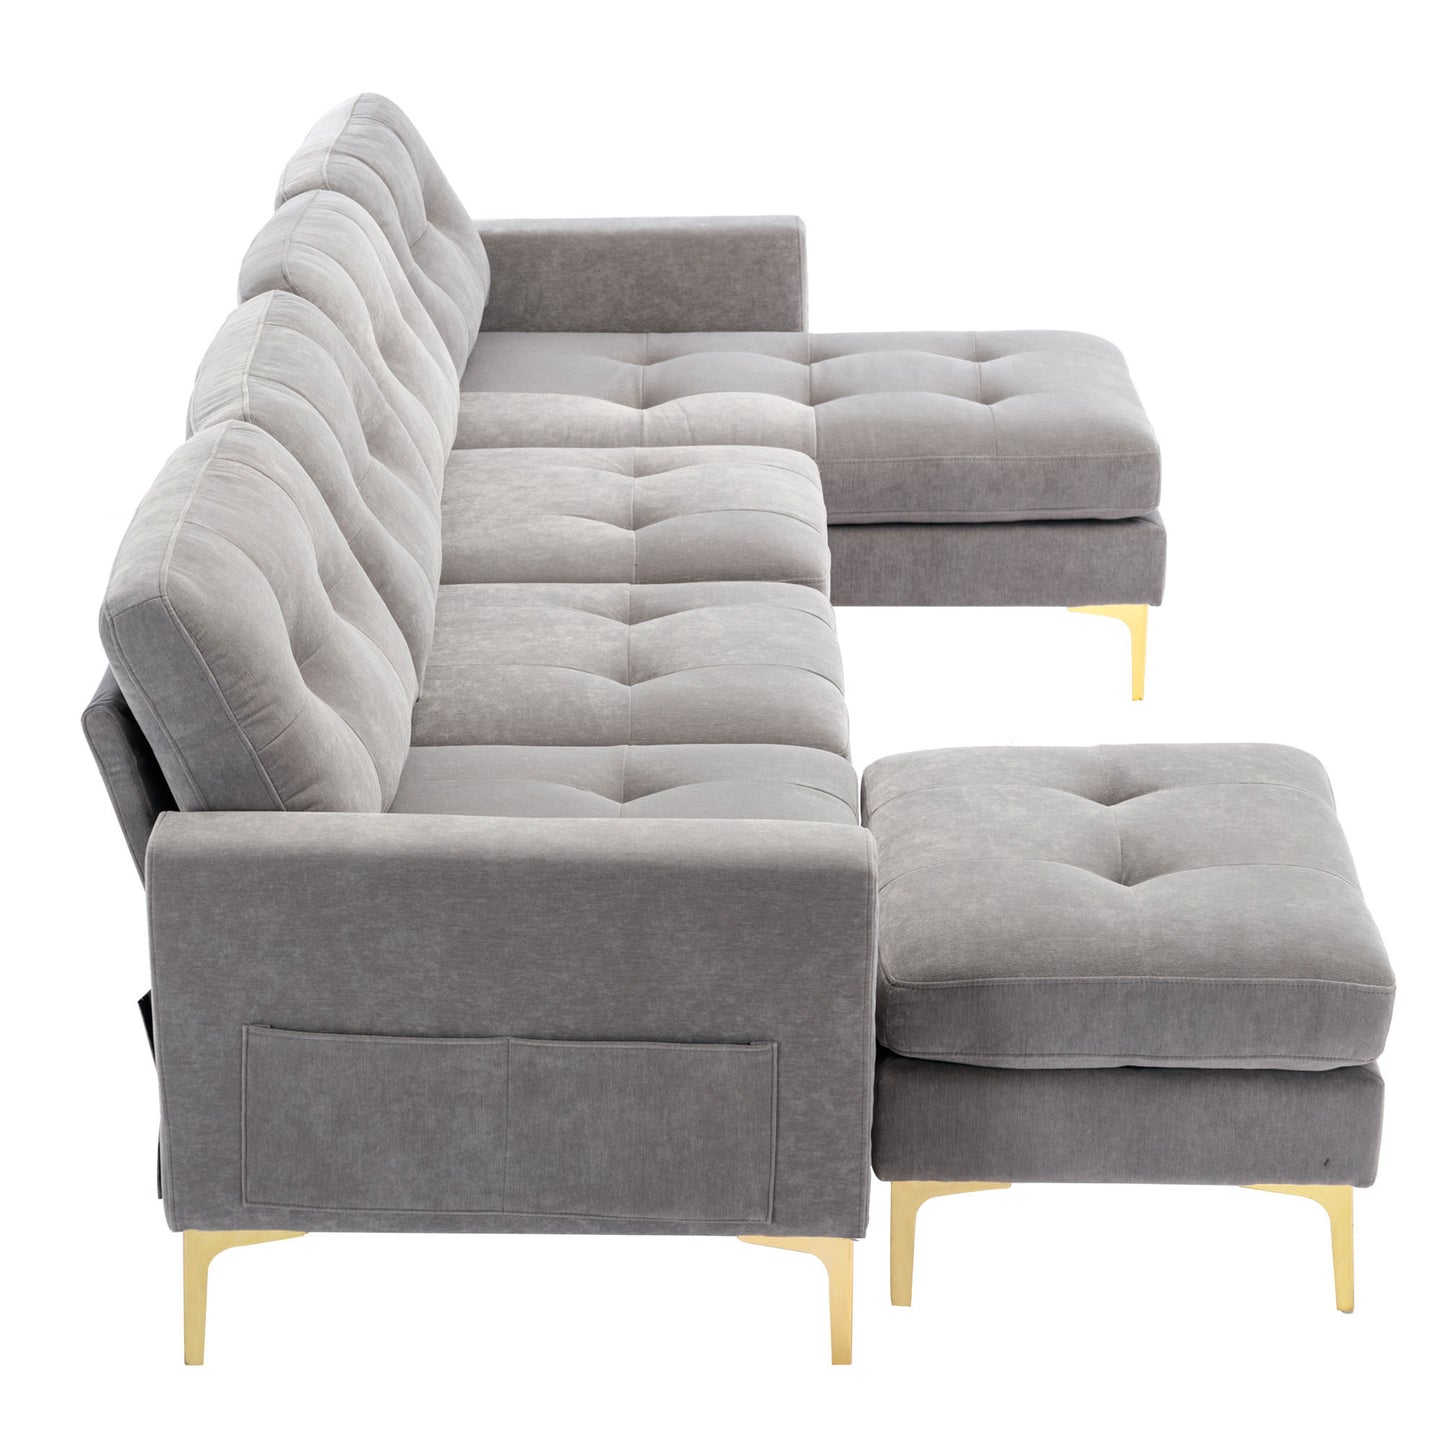 110 Convertible L-Shaped Sectional Sofa with Ottoman in Light Grey